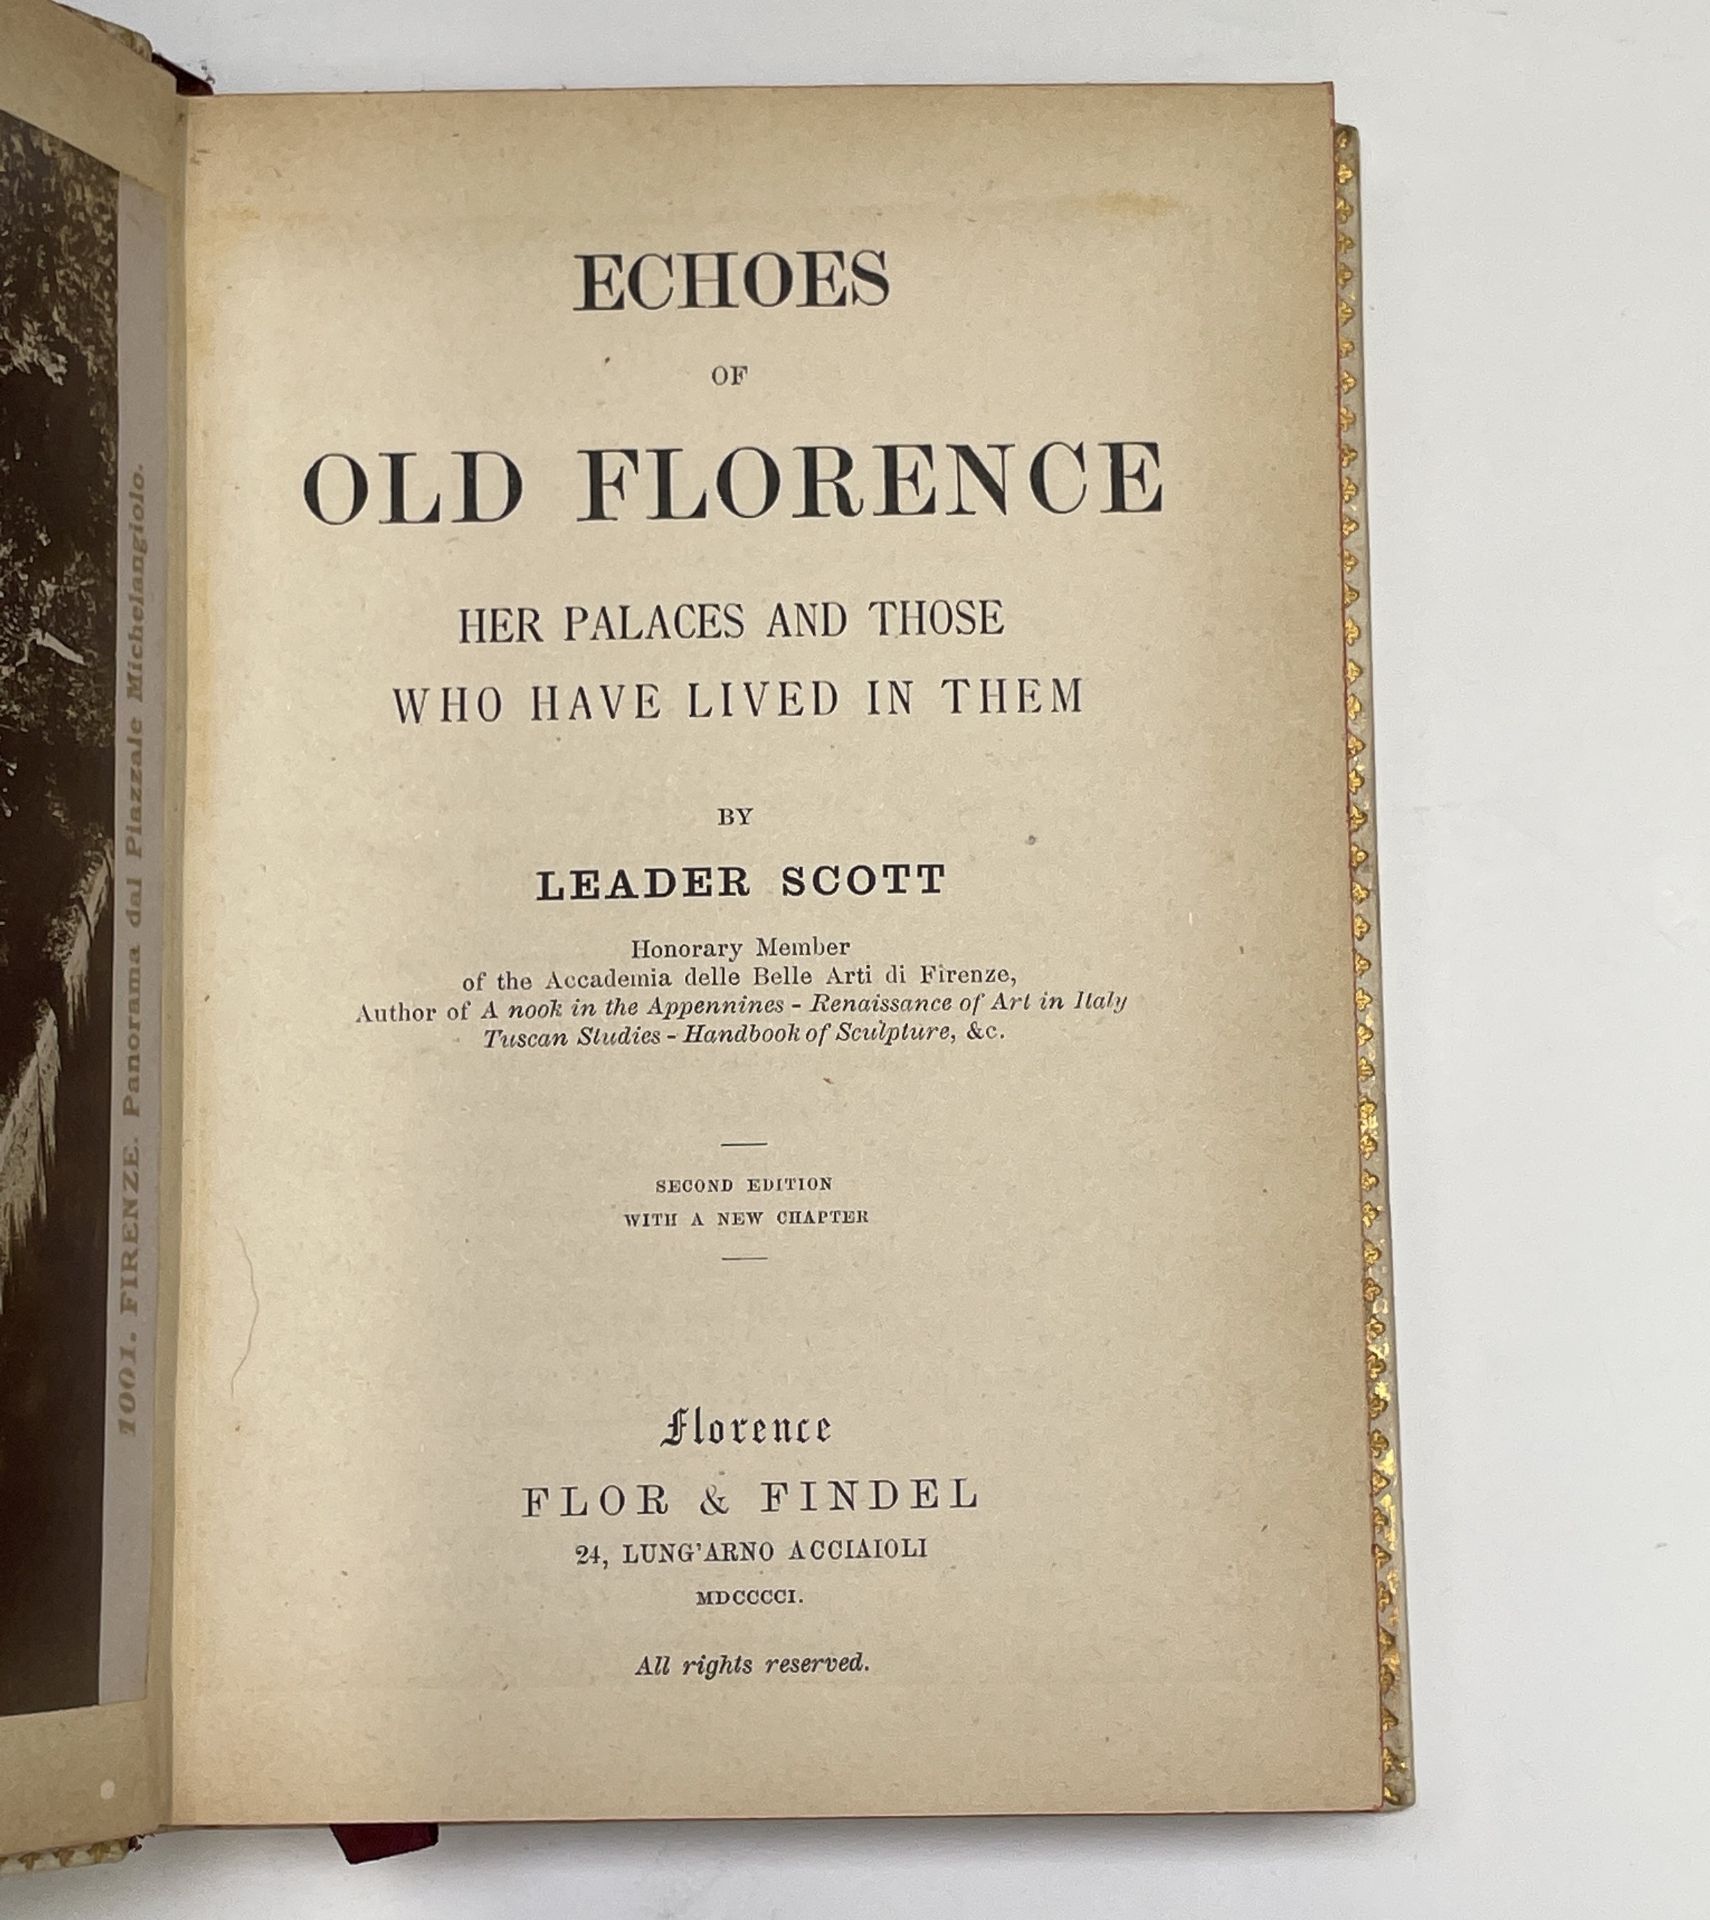 FLORENTINE FINE BINDING. 'Echoes of Old Florence, Her Palaces and Those who have Lived in Them.' - Image 8 of 8